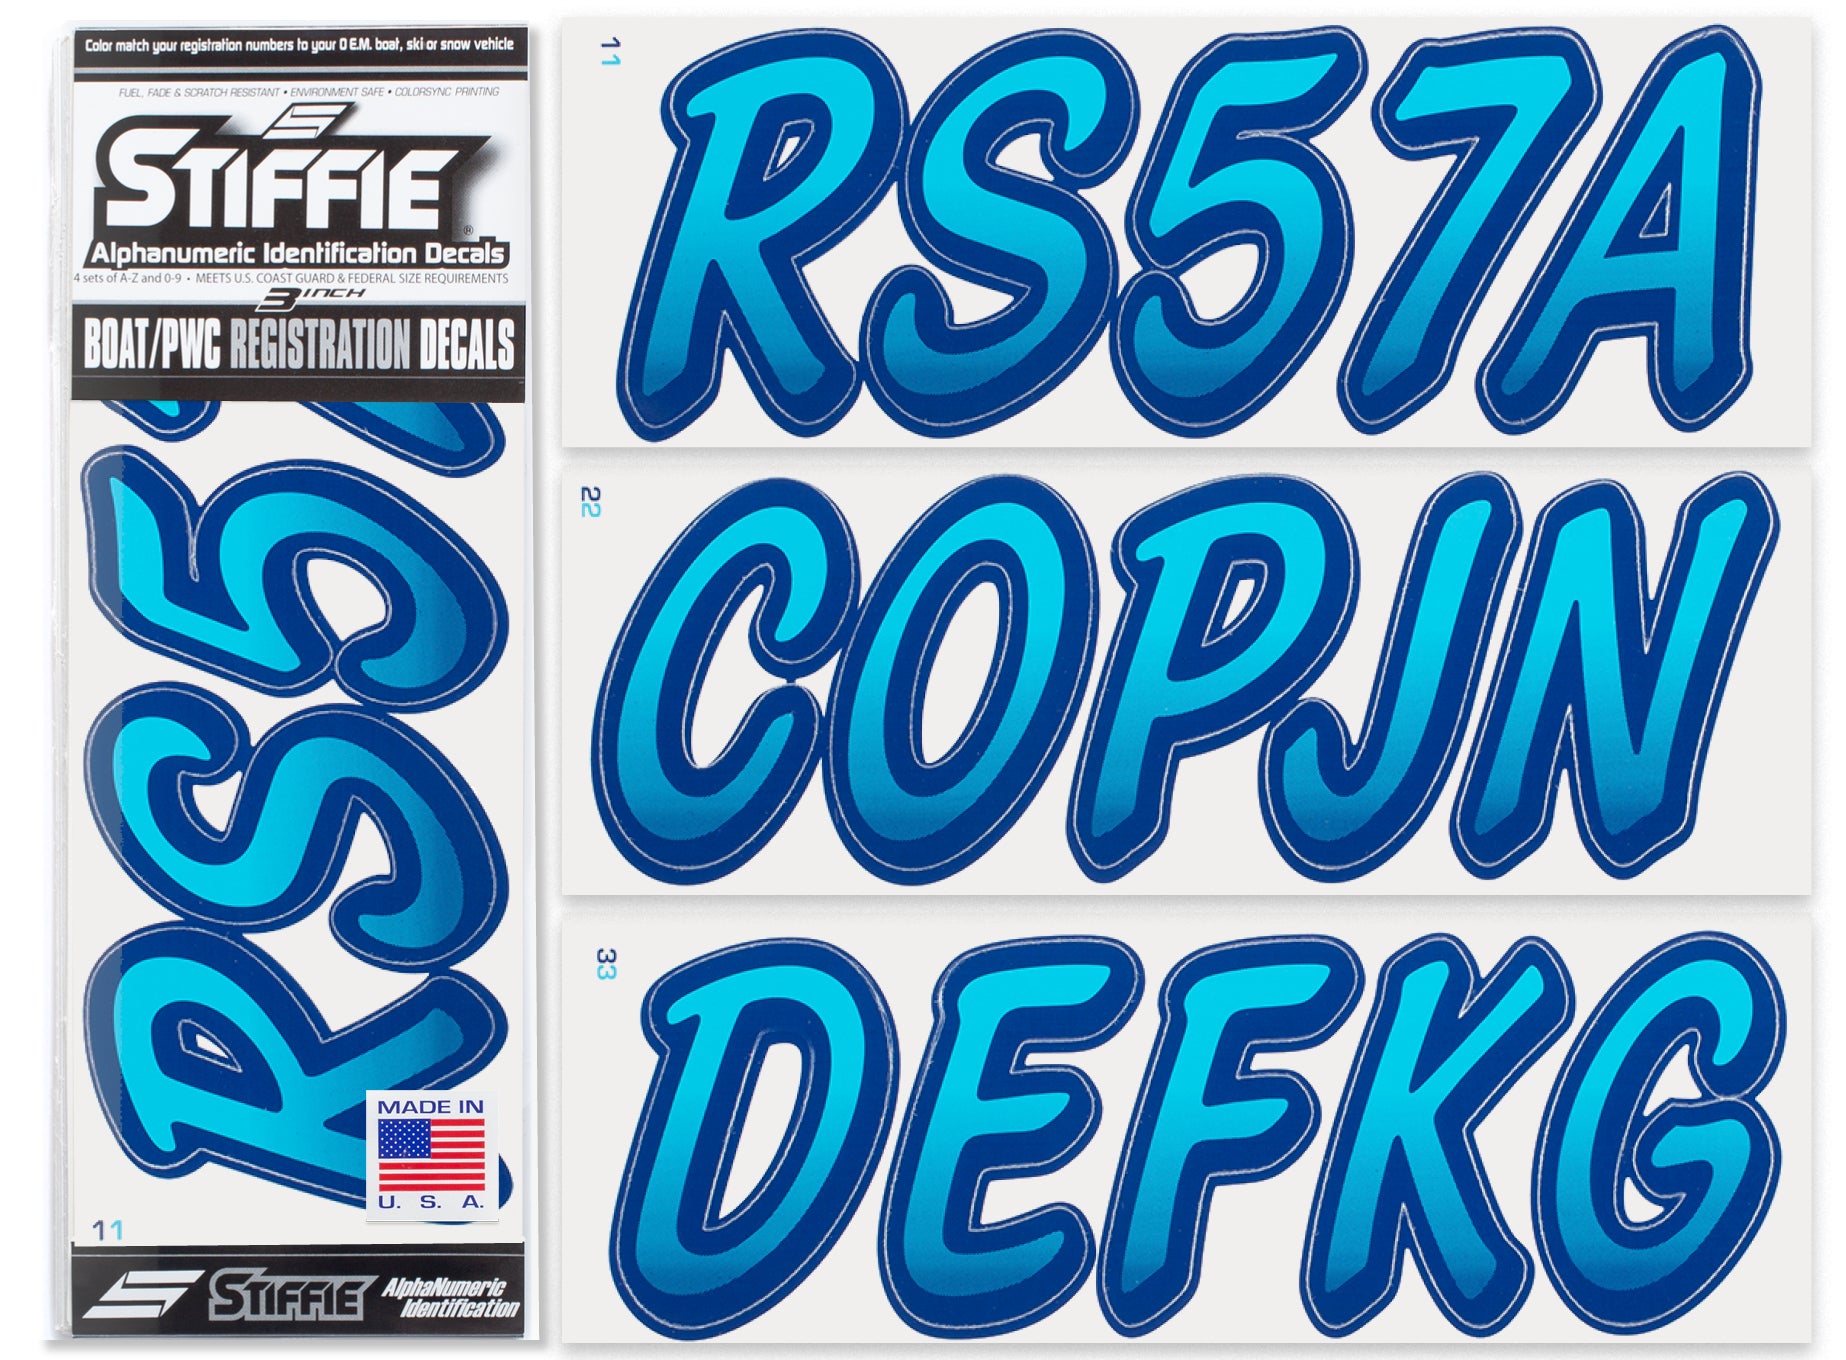 STIFFIE Whipline Sky Blue/Navy 3" Alpha-Numeric Registration Identification Numbers Stickers Decals for Boats & Personal Watercraft